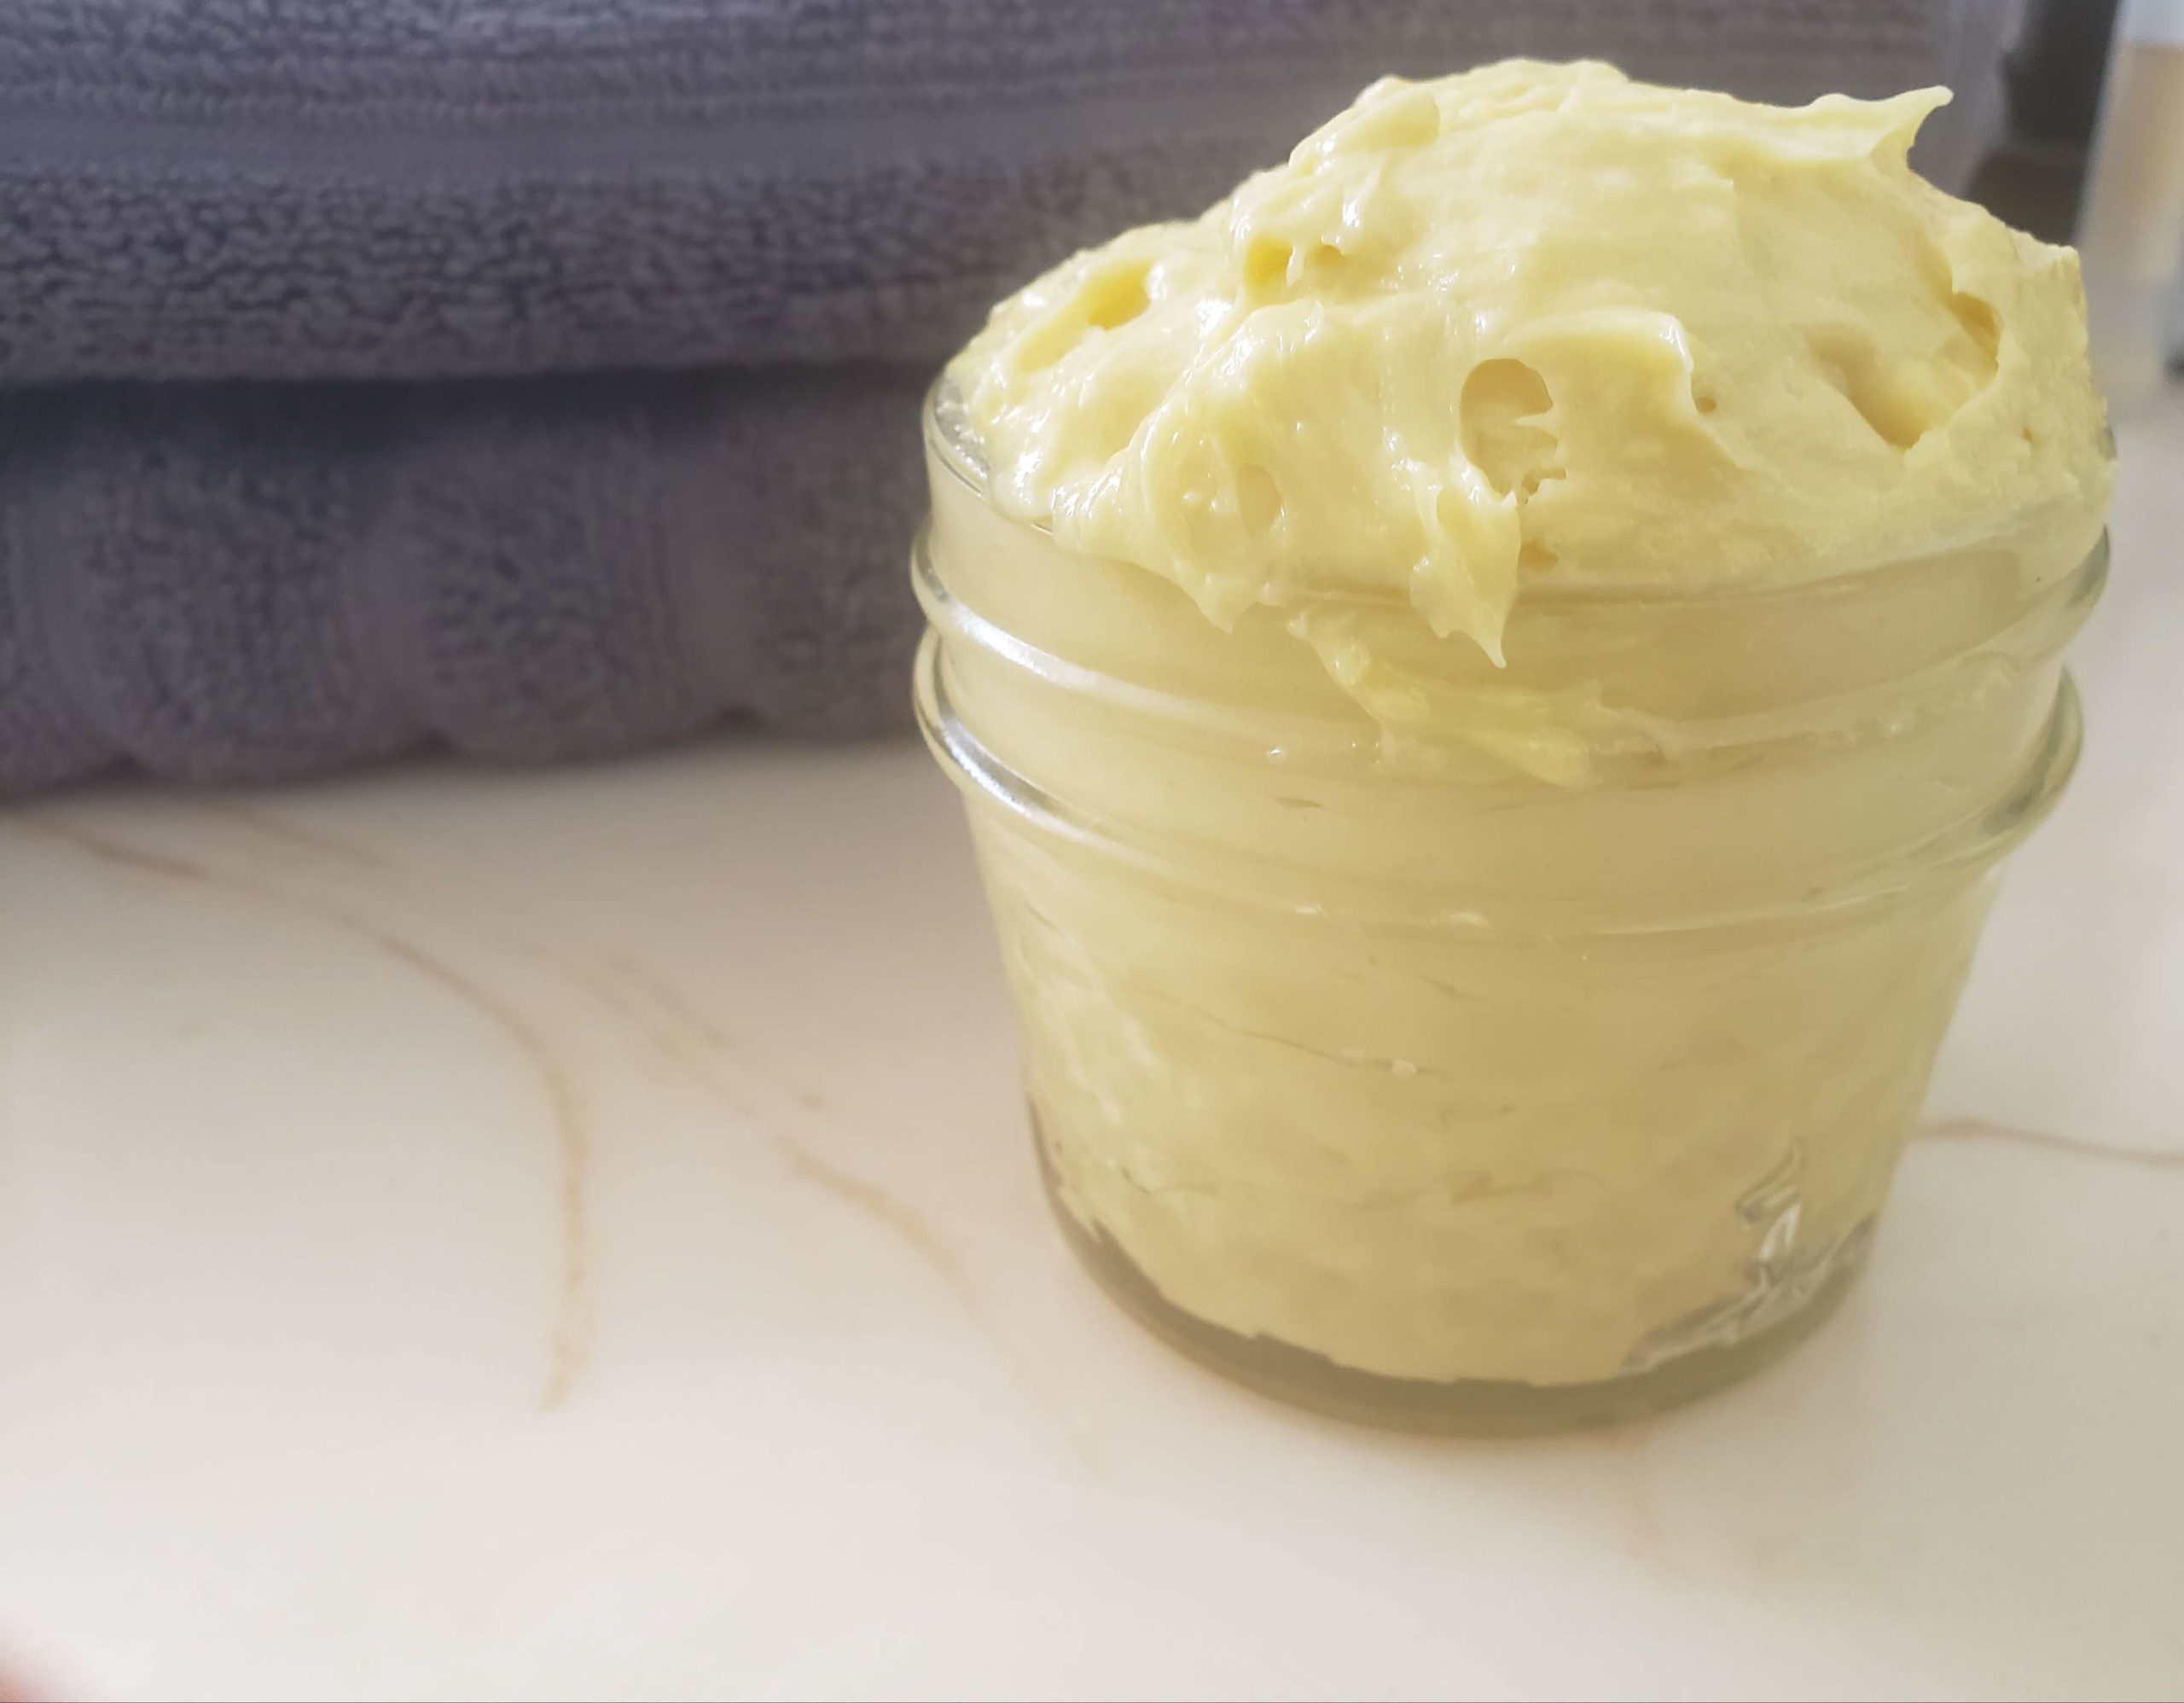 Whipped Homemade Olive Olive Body Cream Recipe with Shea Butter and Essential oils